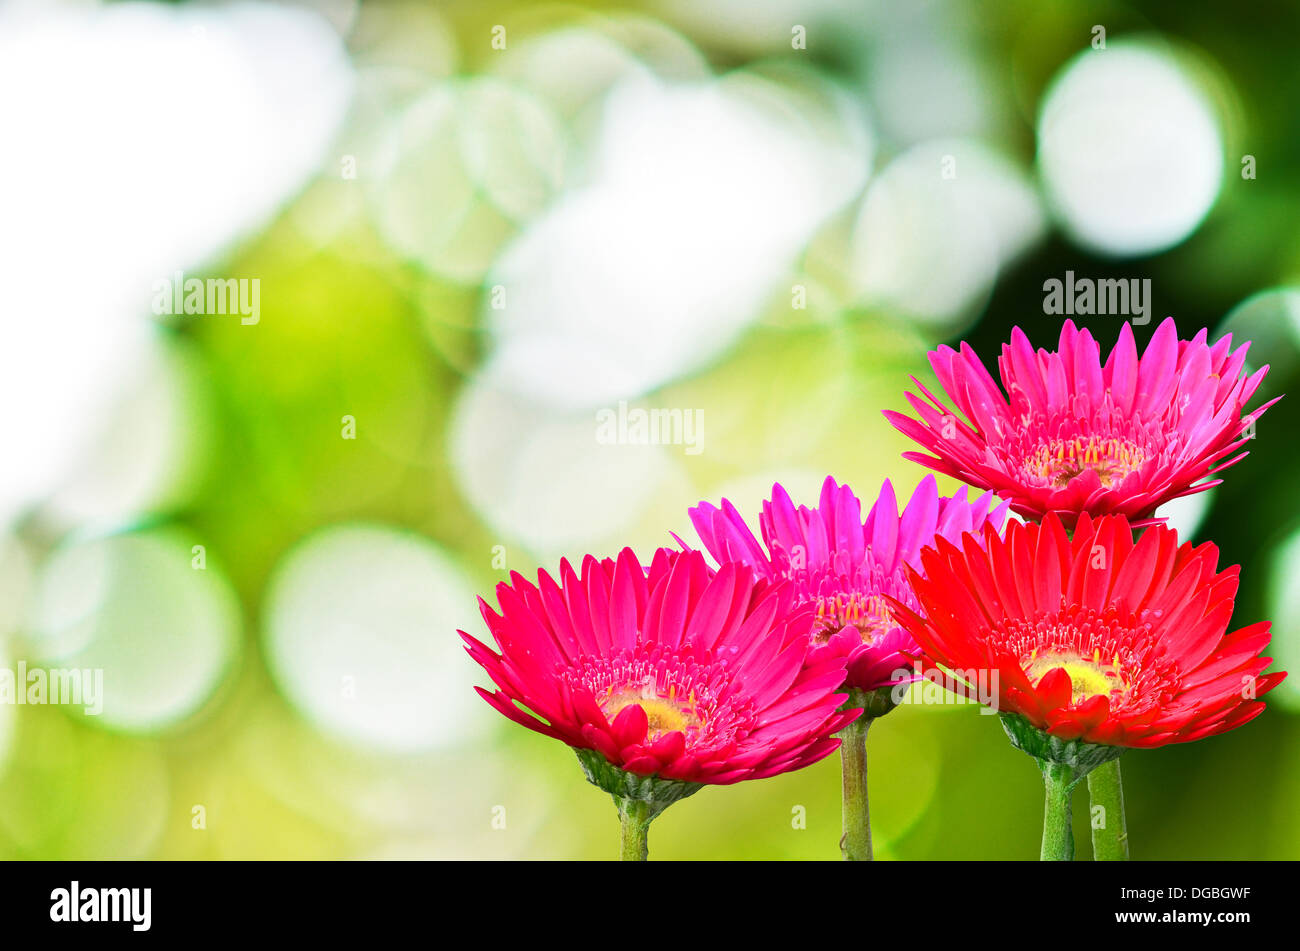 gerbera daisies on sunny abstract background Stock Photo